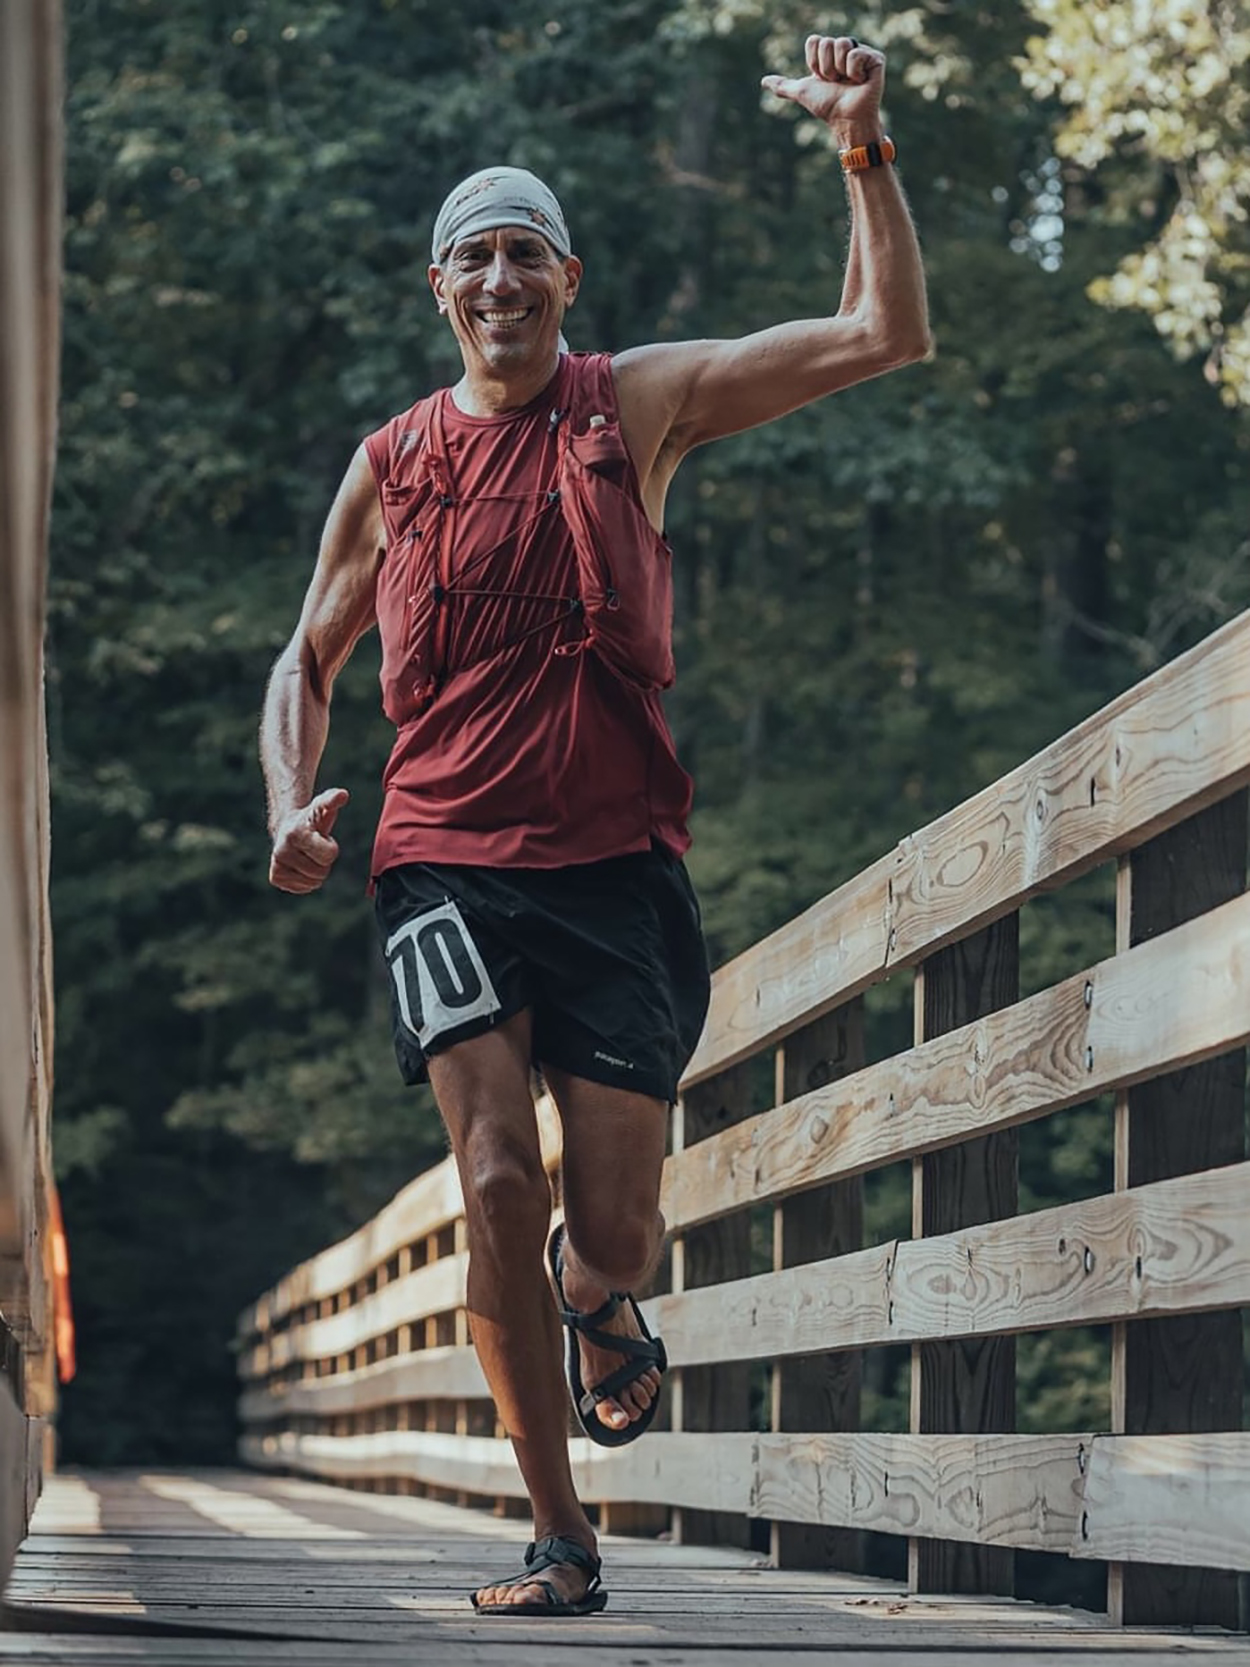 Kreill had been a runner as a young man but gave it up after experiencing foot and ankle pain. He renewed his passion for running by changing his footwear and his form. He is shown wearing his Xero Shoes sandals at the Tye Kye 50 K in Yellow Springs in May of 2022. He was 59 years old.